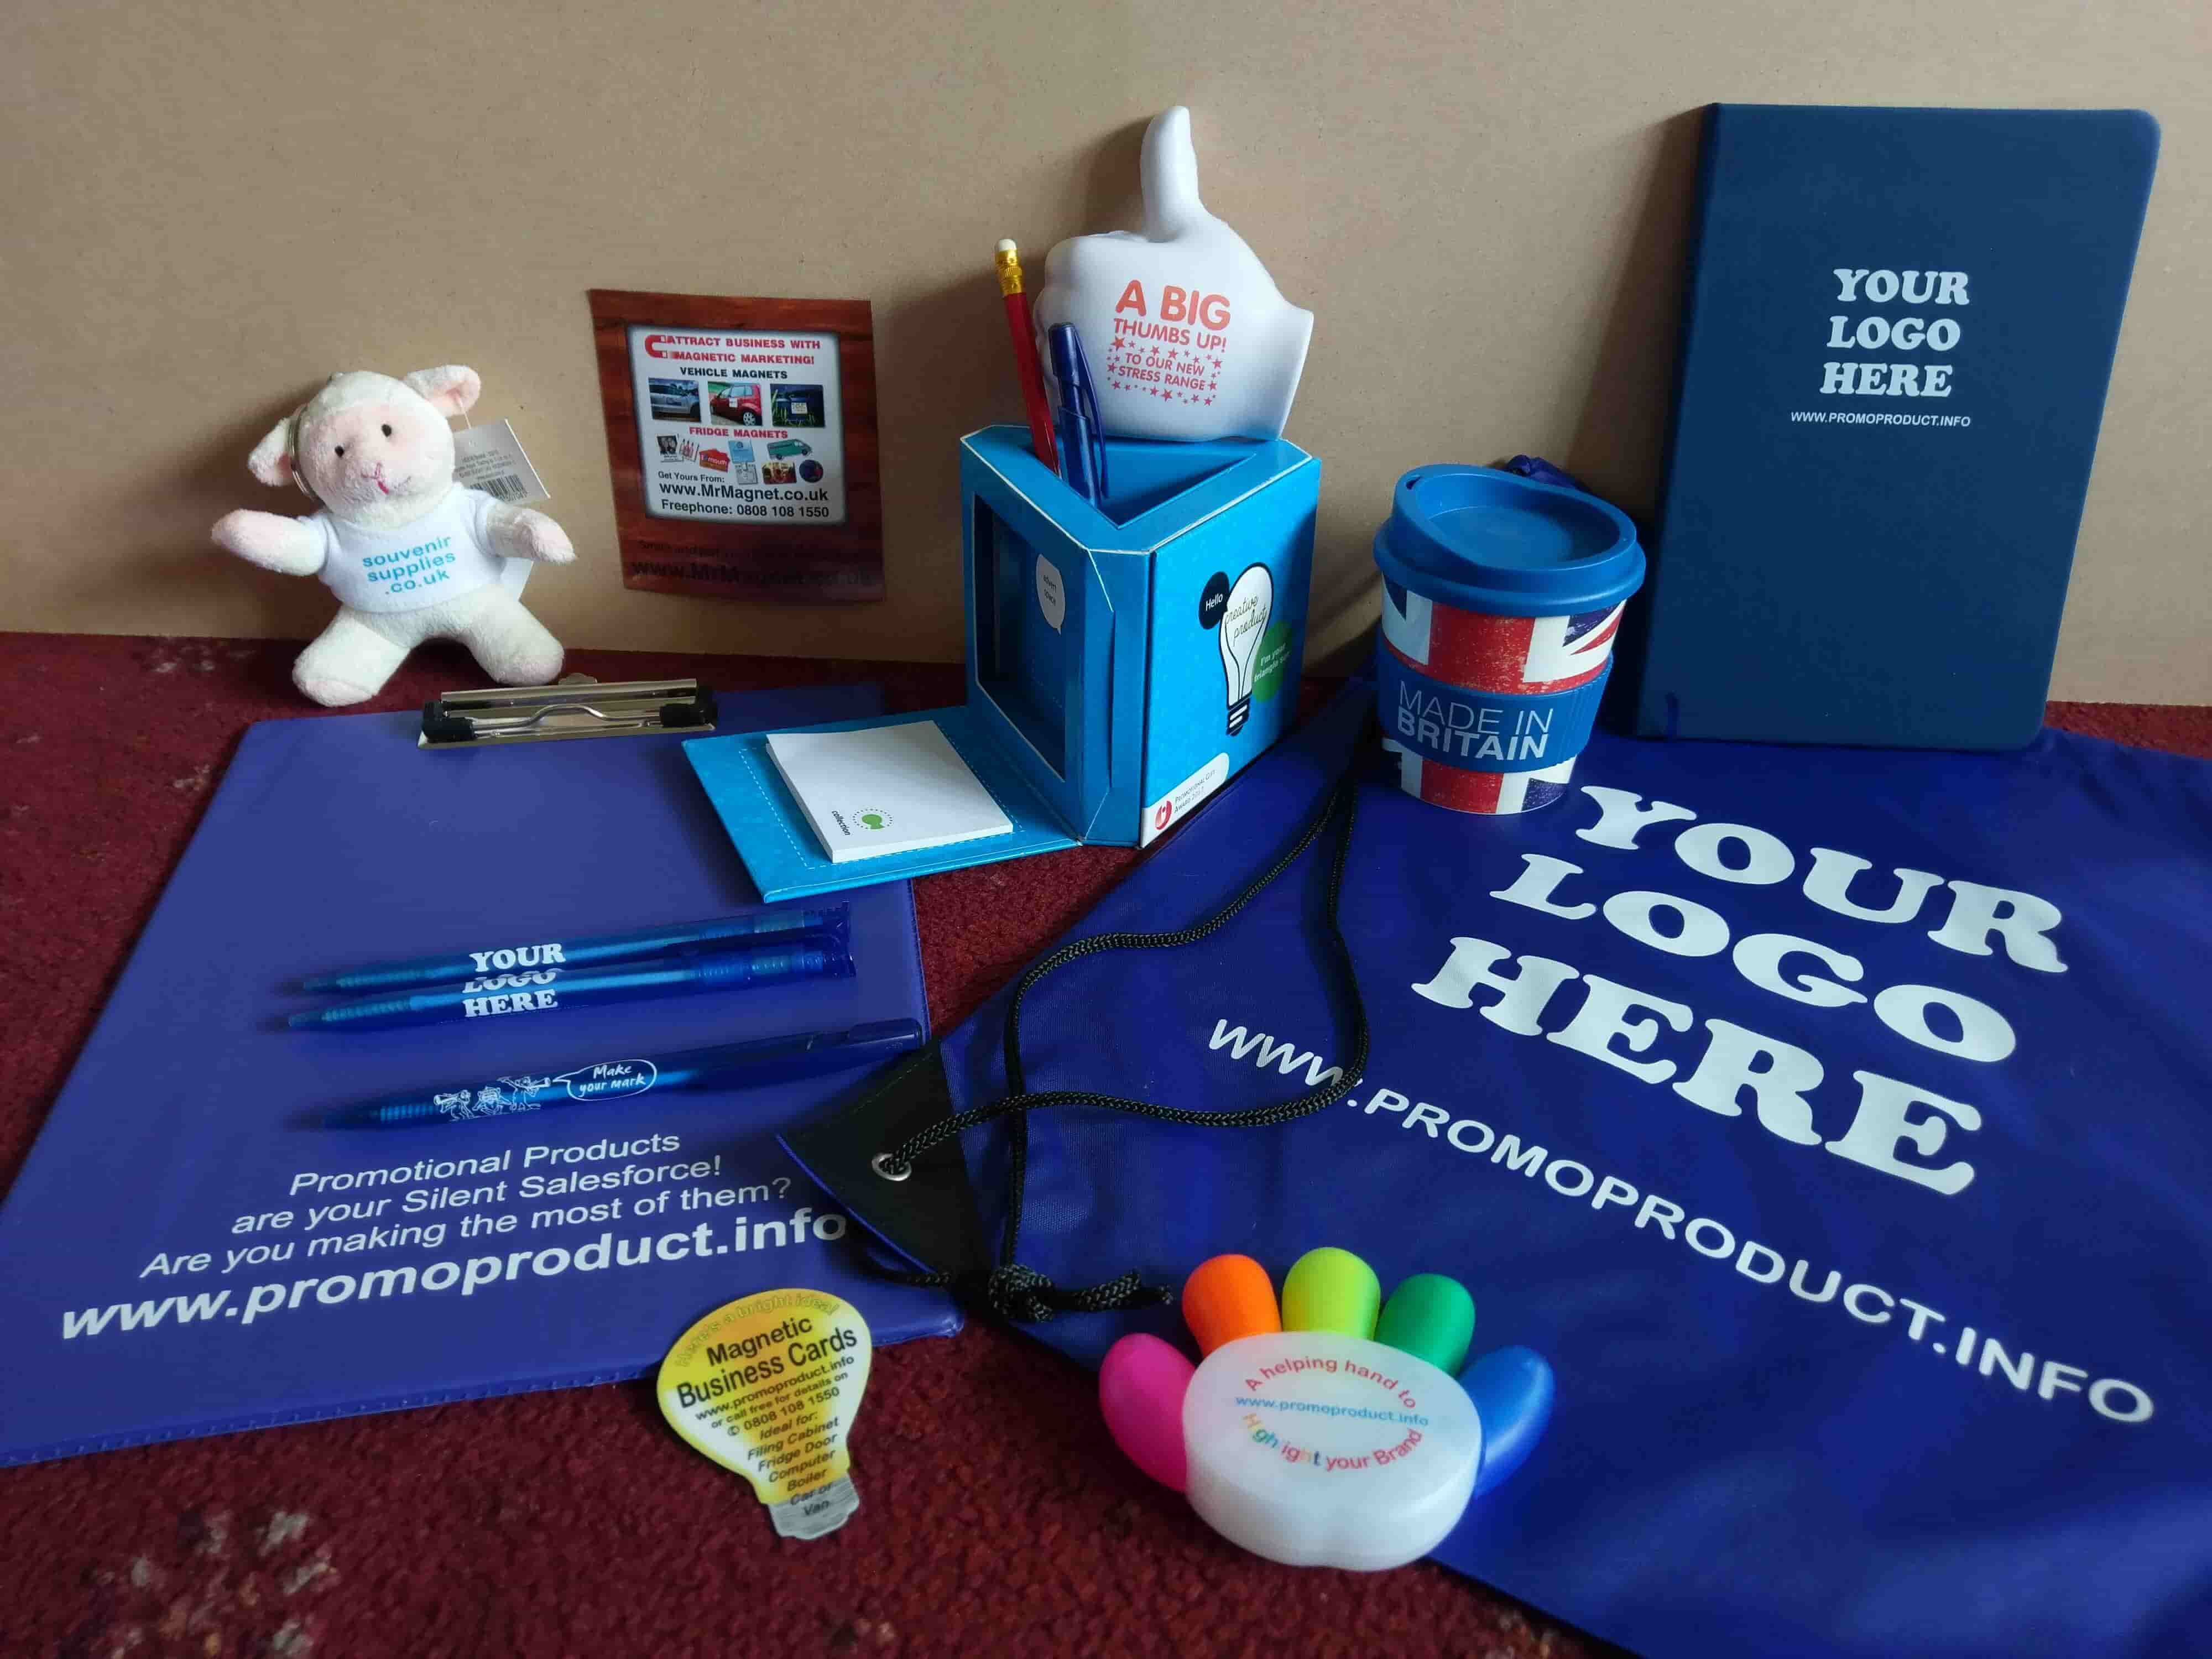 Promotional Products and Branded Merchandise